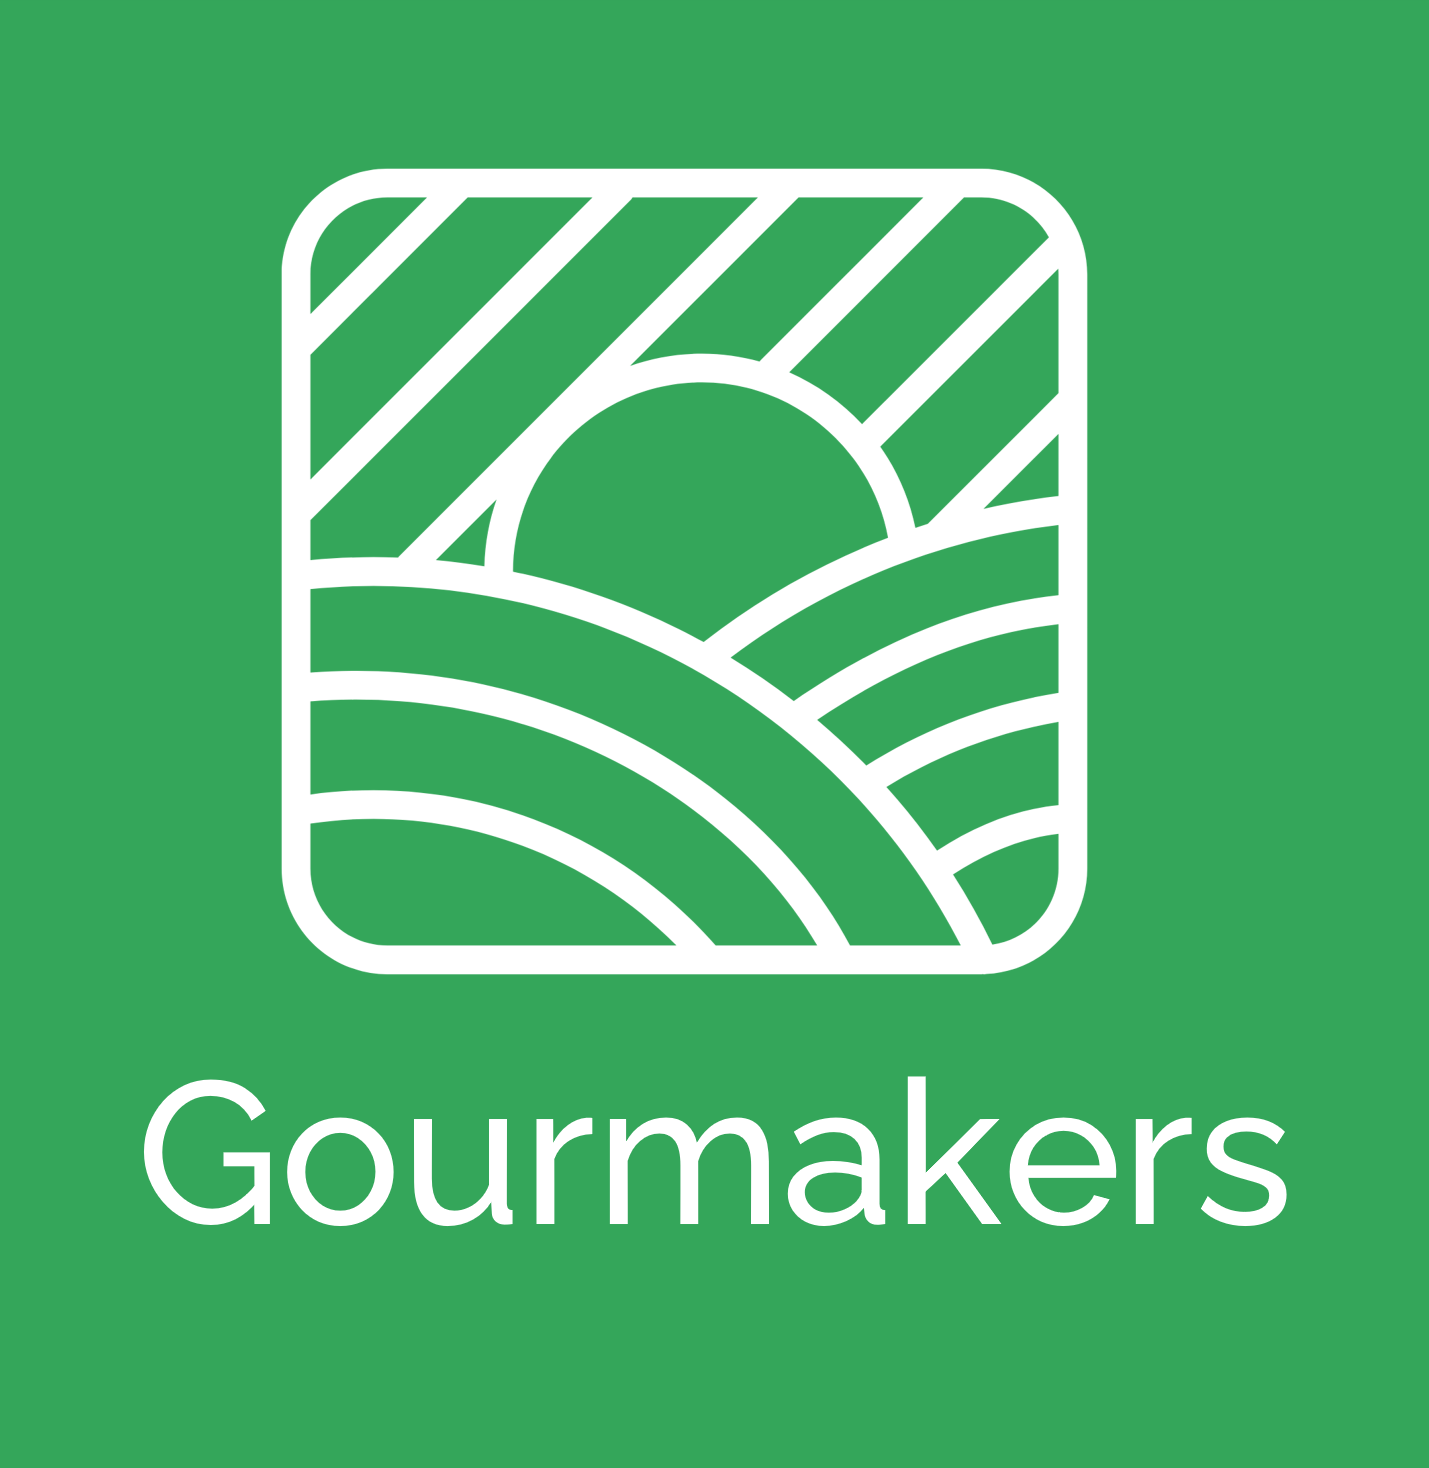 Gourmakers logo